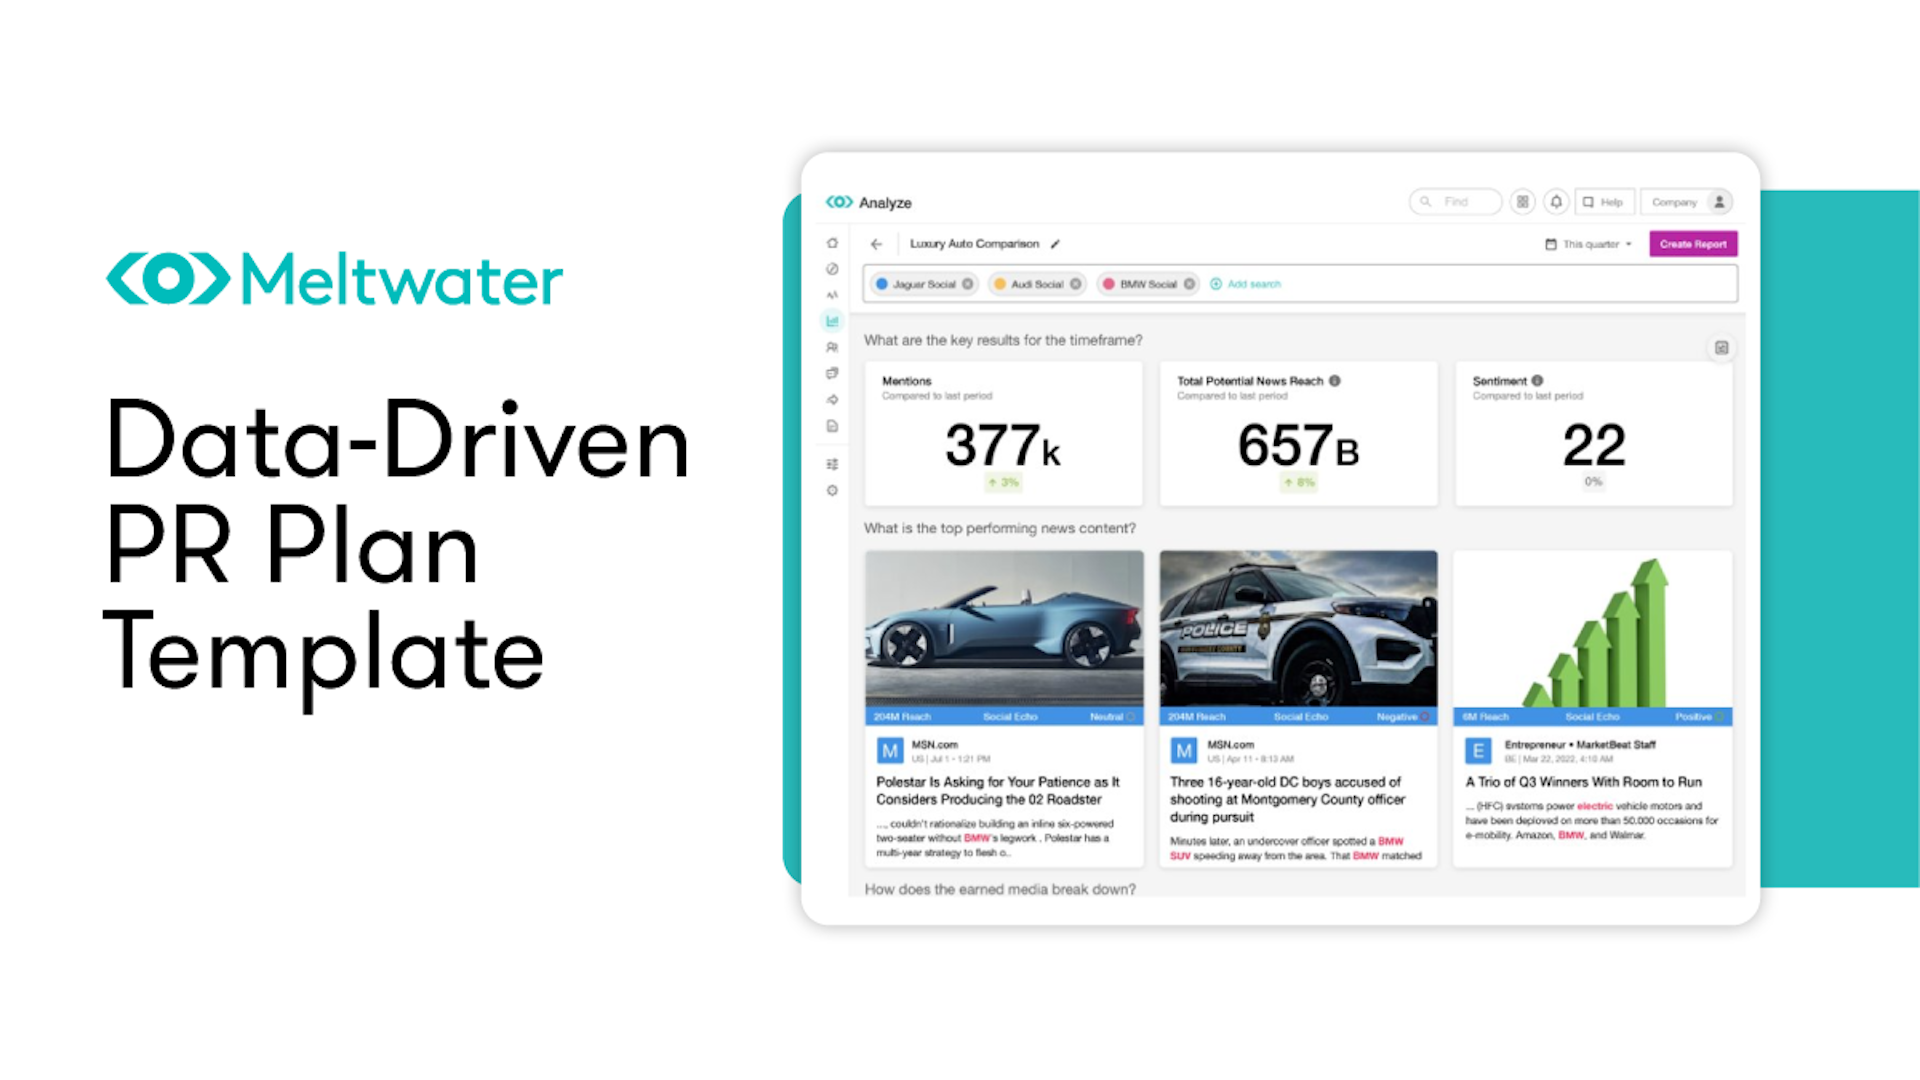 Image of the Meltwater product with the text Data-Driven PR Plan Template